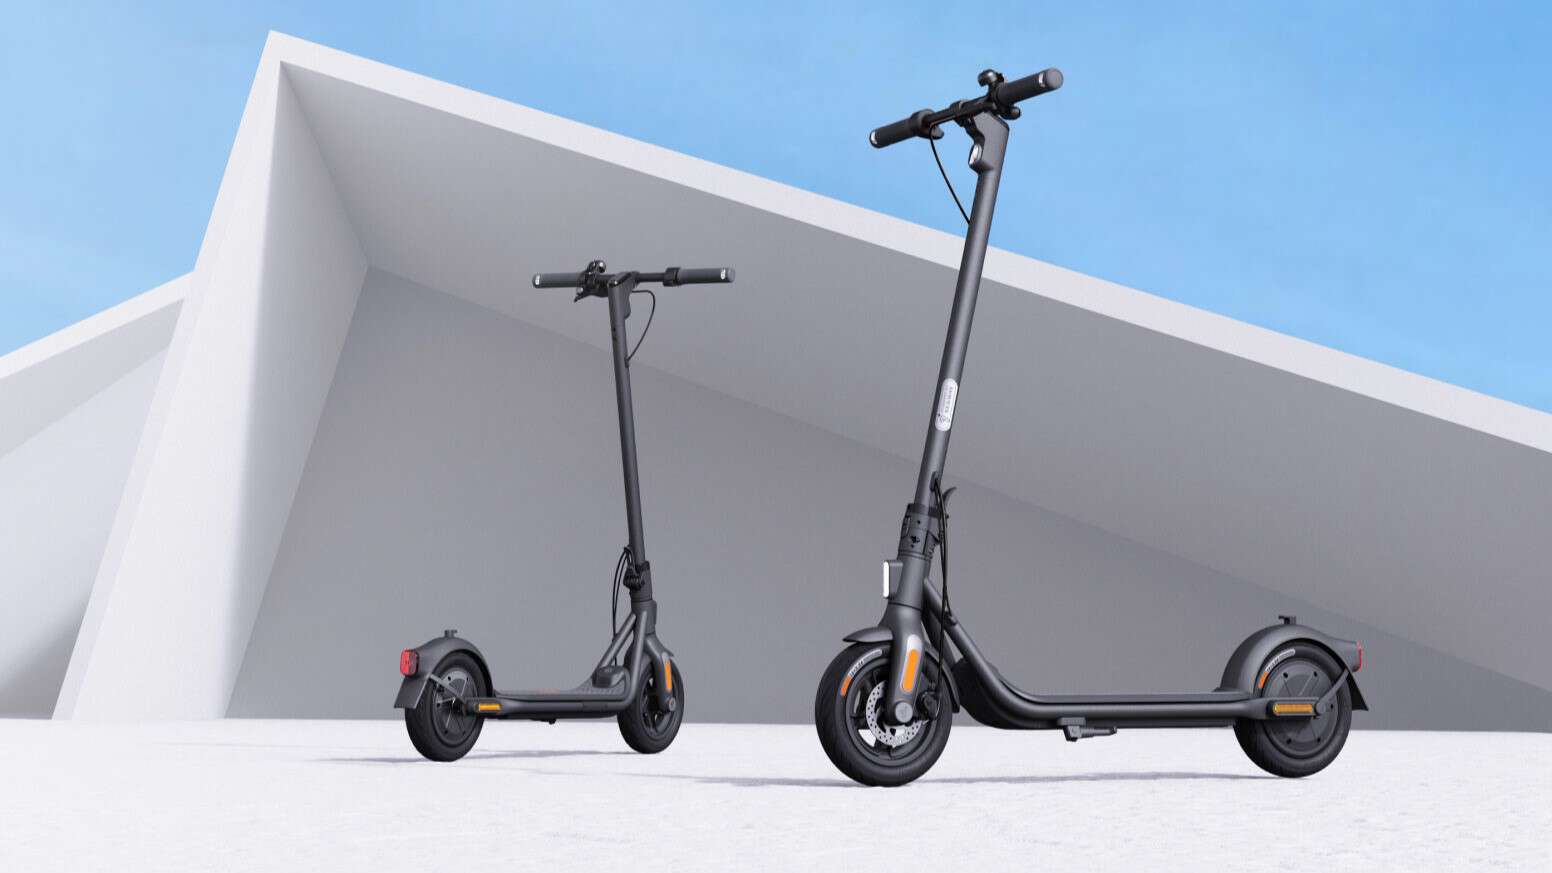 Modular Design | Segway-Ninebot Launched New Portable Power Station-Chargerlab